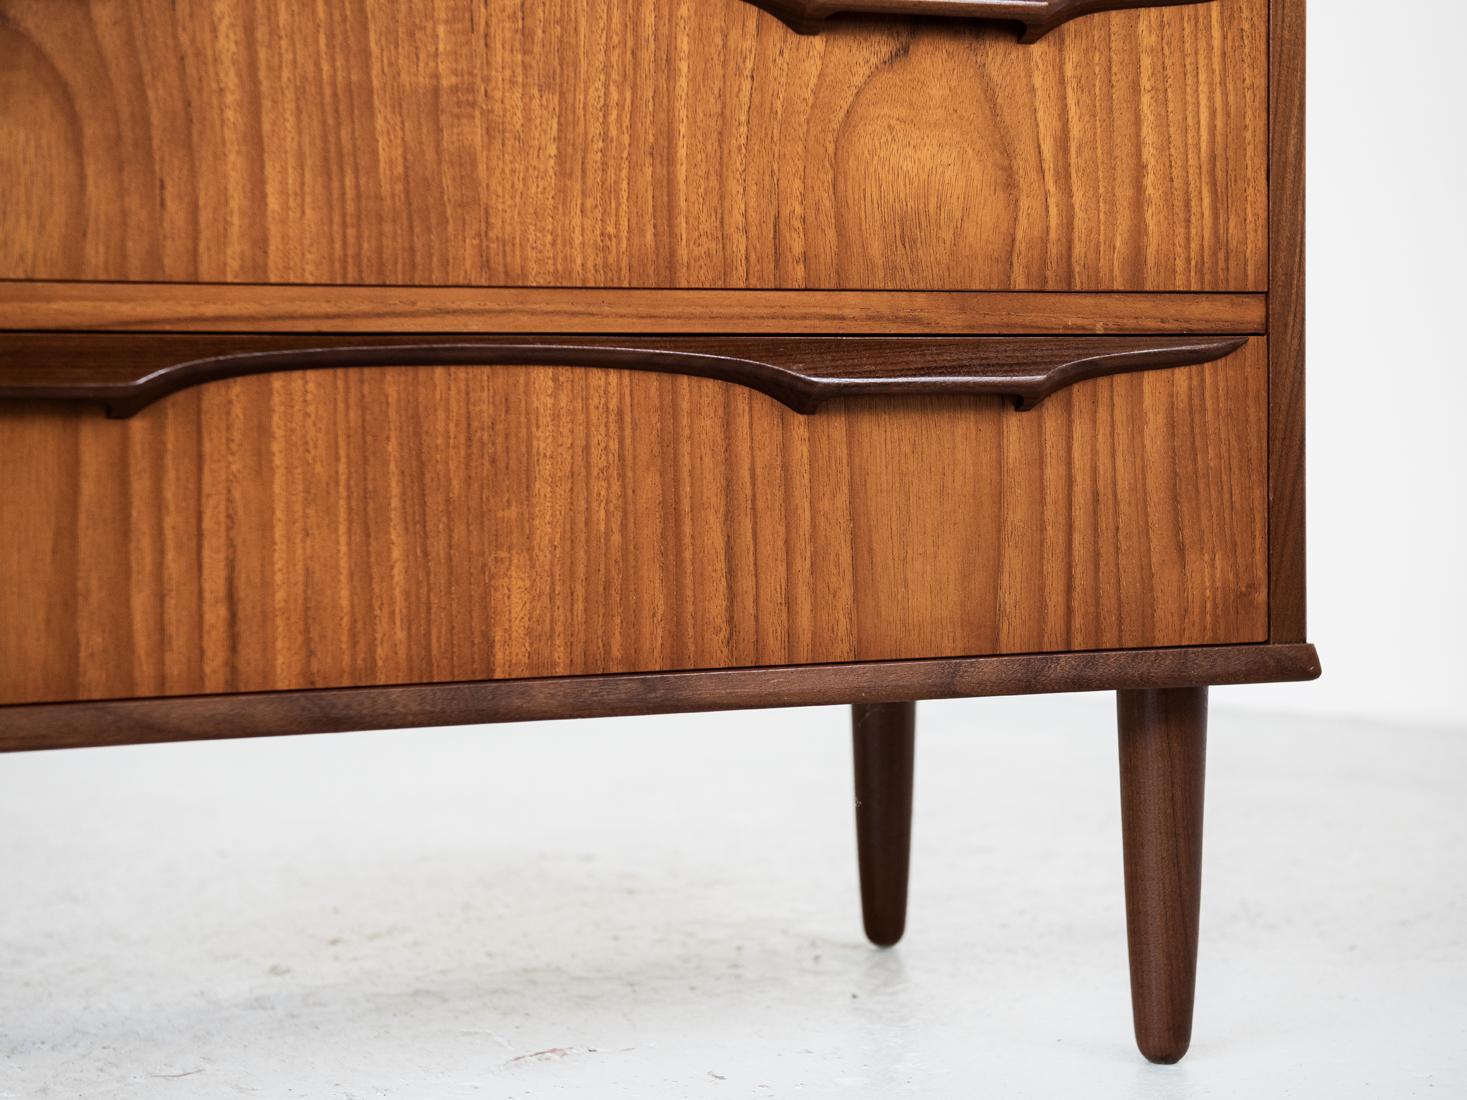 Midcentury Danish Chest of 6 Drawers in Teak by Klaus Okholm, 1960s For Sale 1